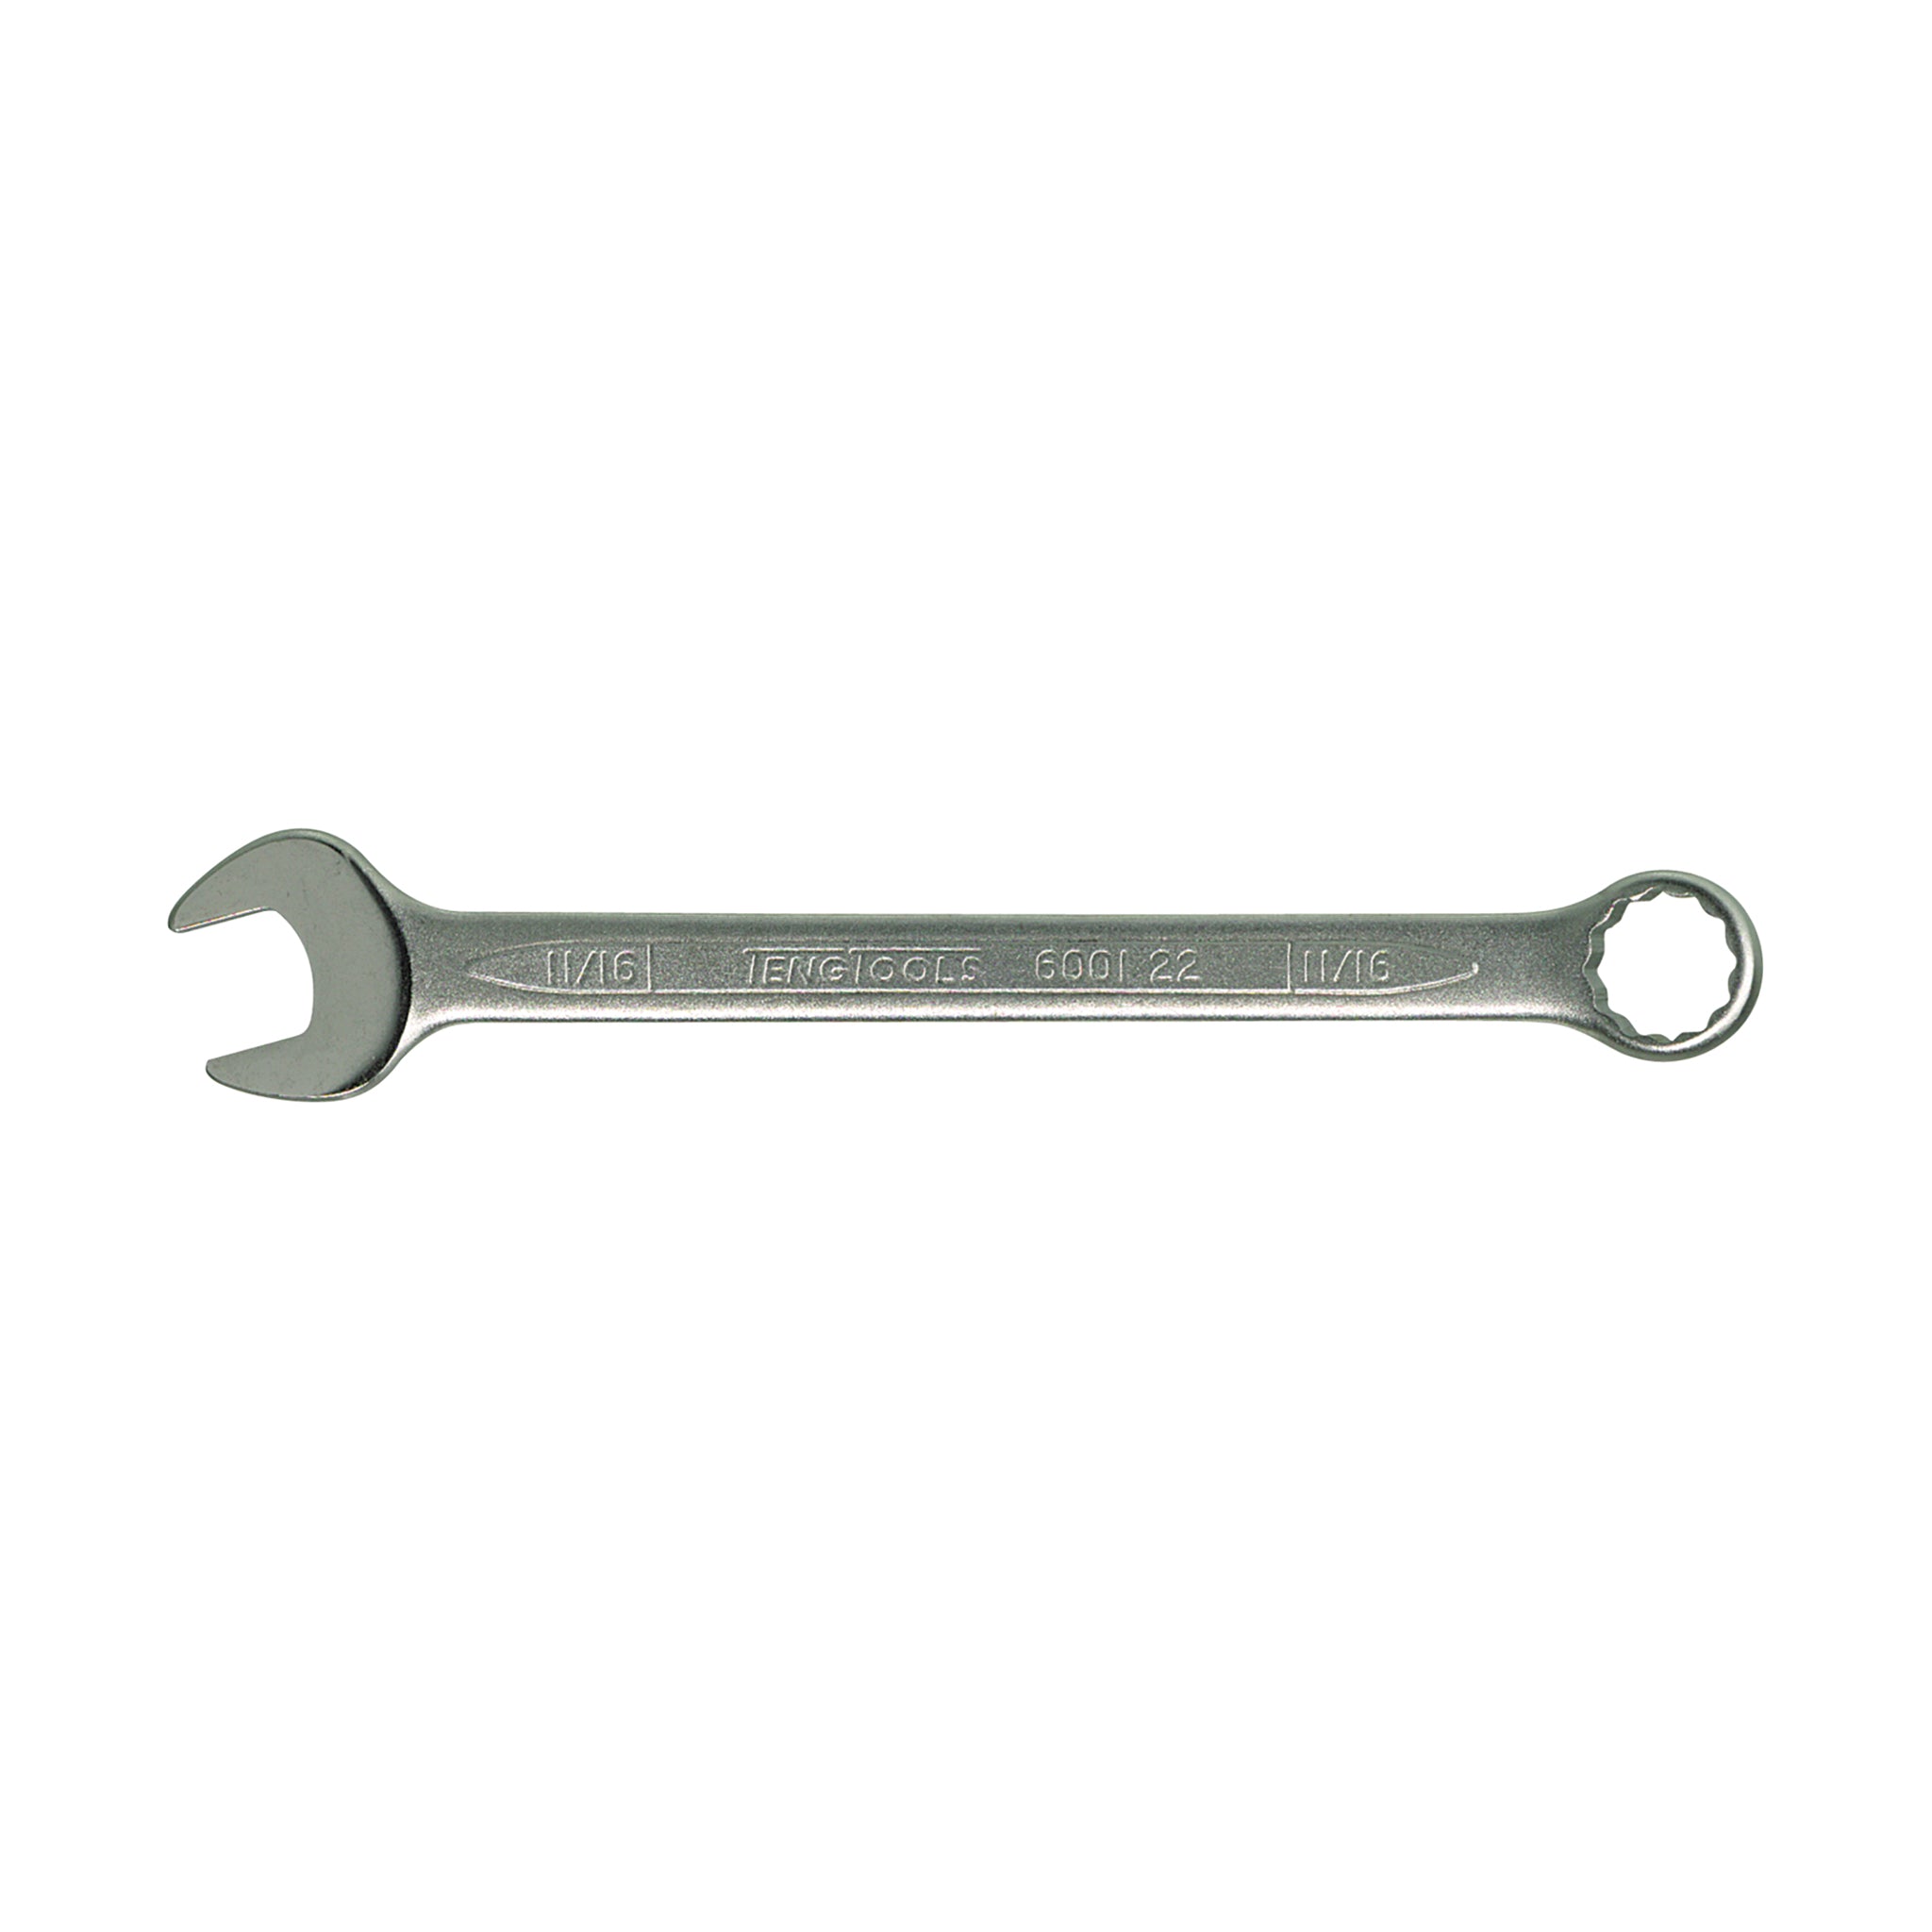 Standard Combination SAE Wrenches Made With Chrome Vanadium Steel - 1-7/8